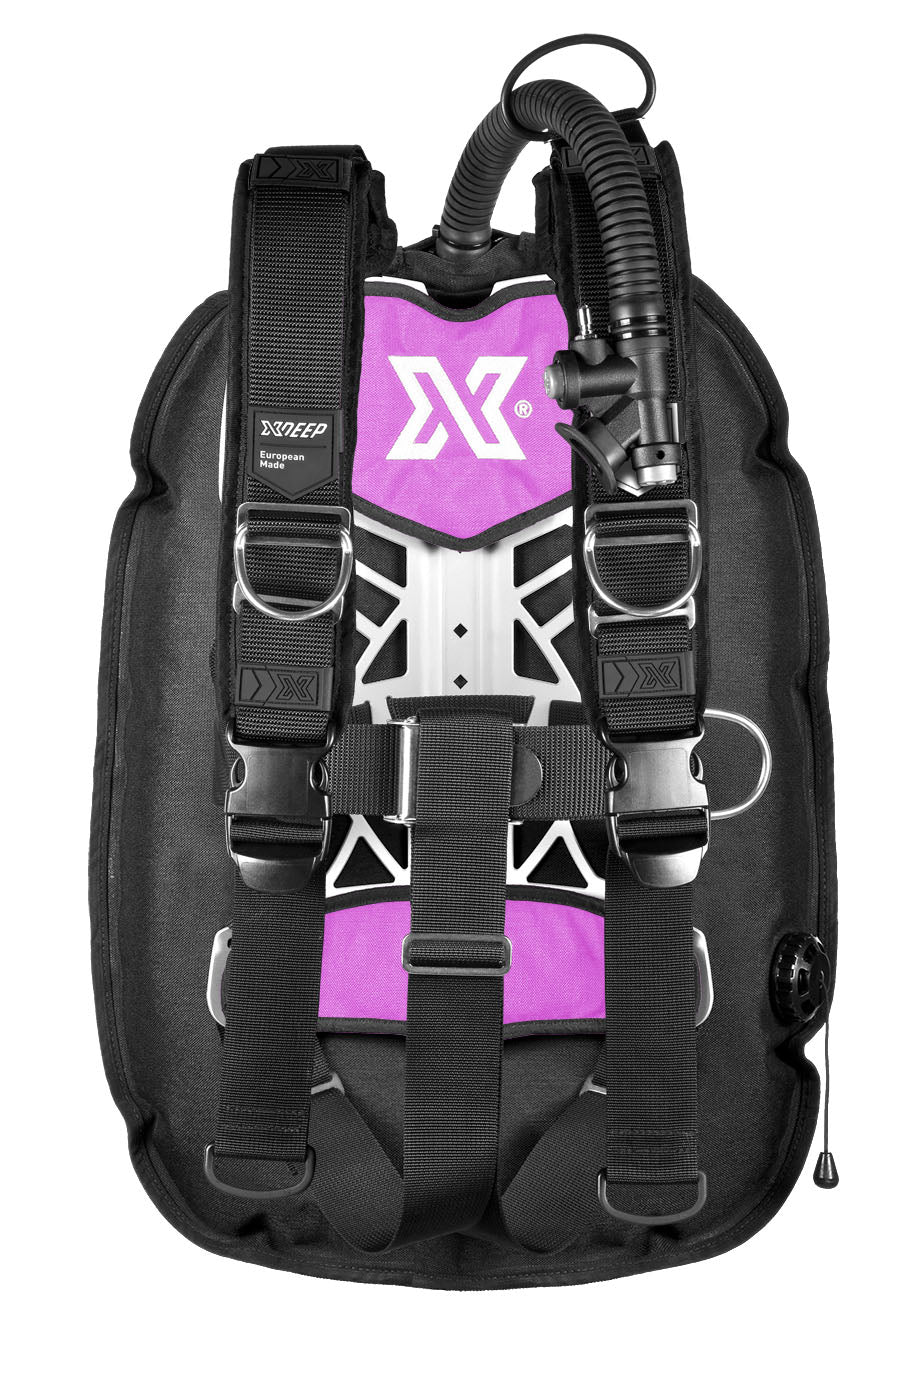 XDEEP Ghost Deluxe Harness